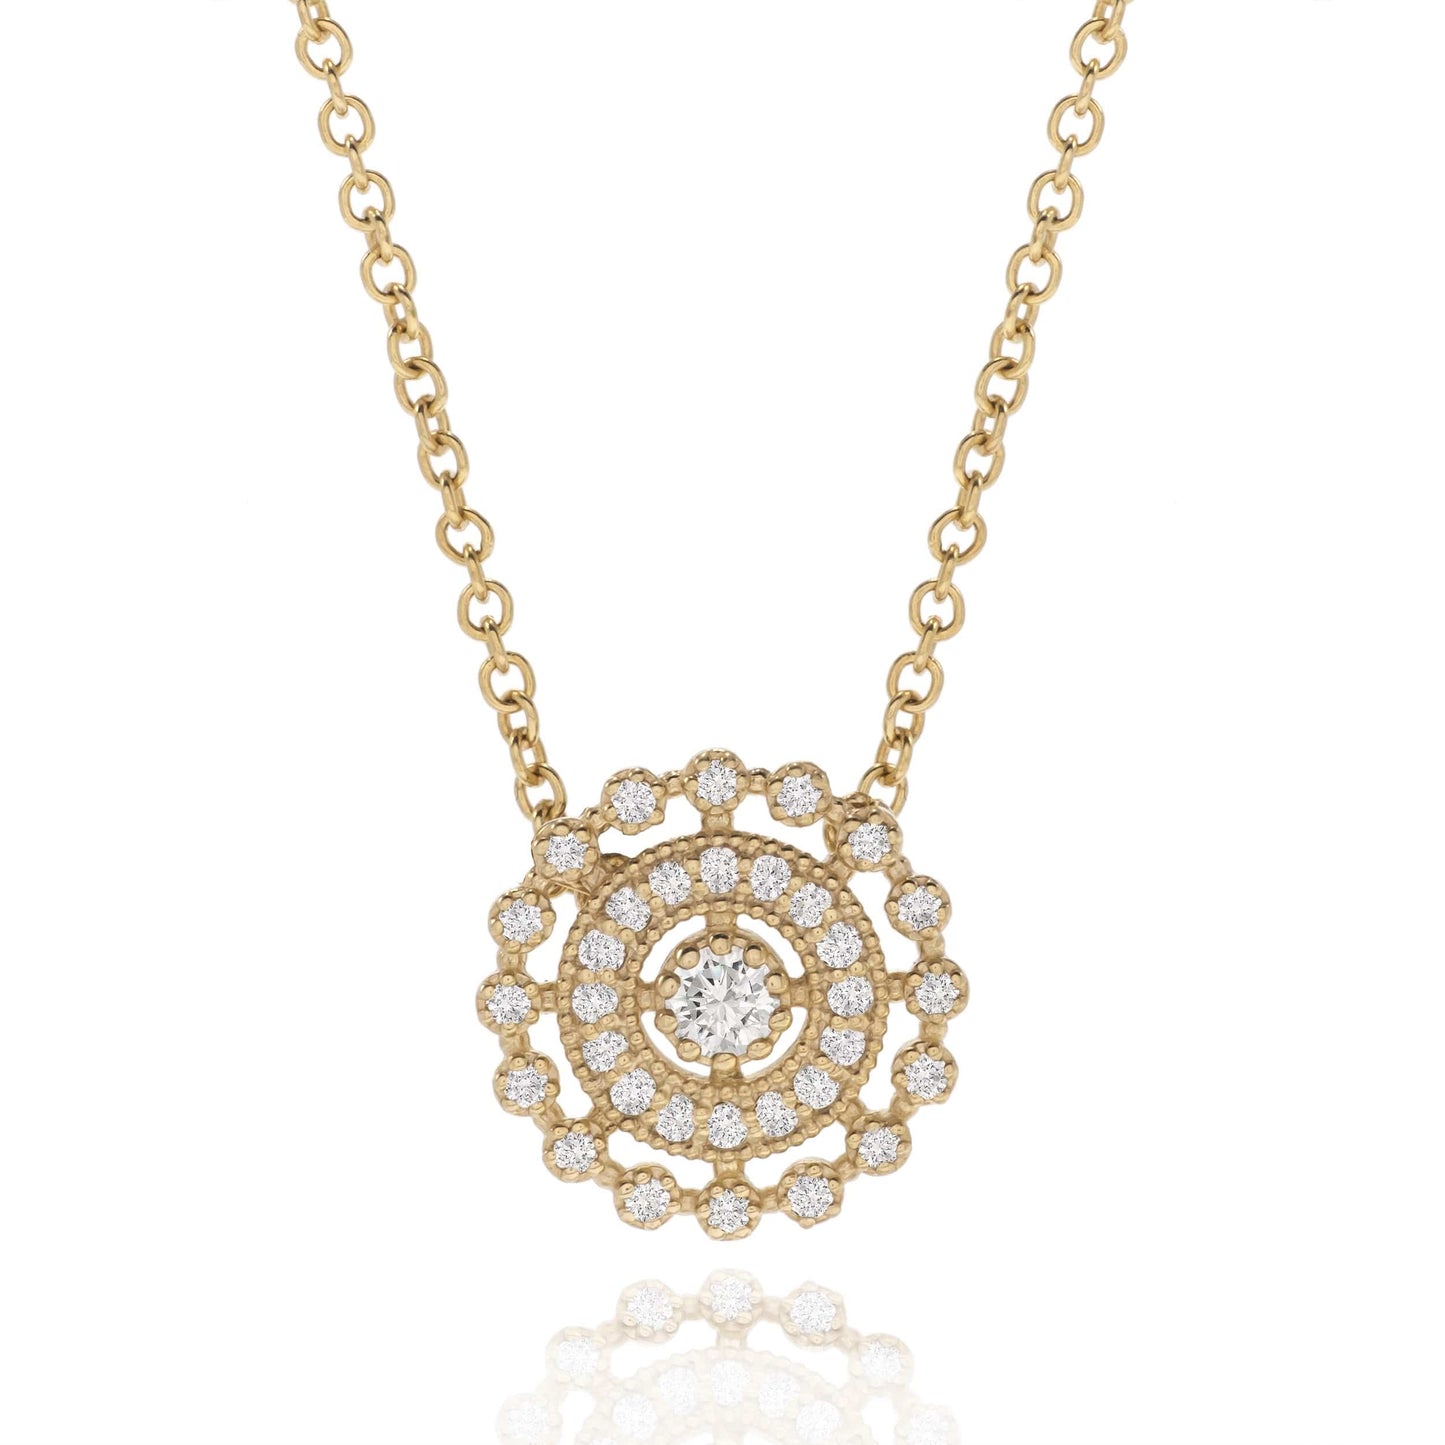 Dalia T Online Necklace Lace Collection 14KT Yellow Gold Diamond Necklace